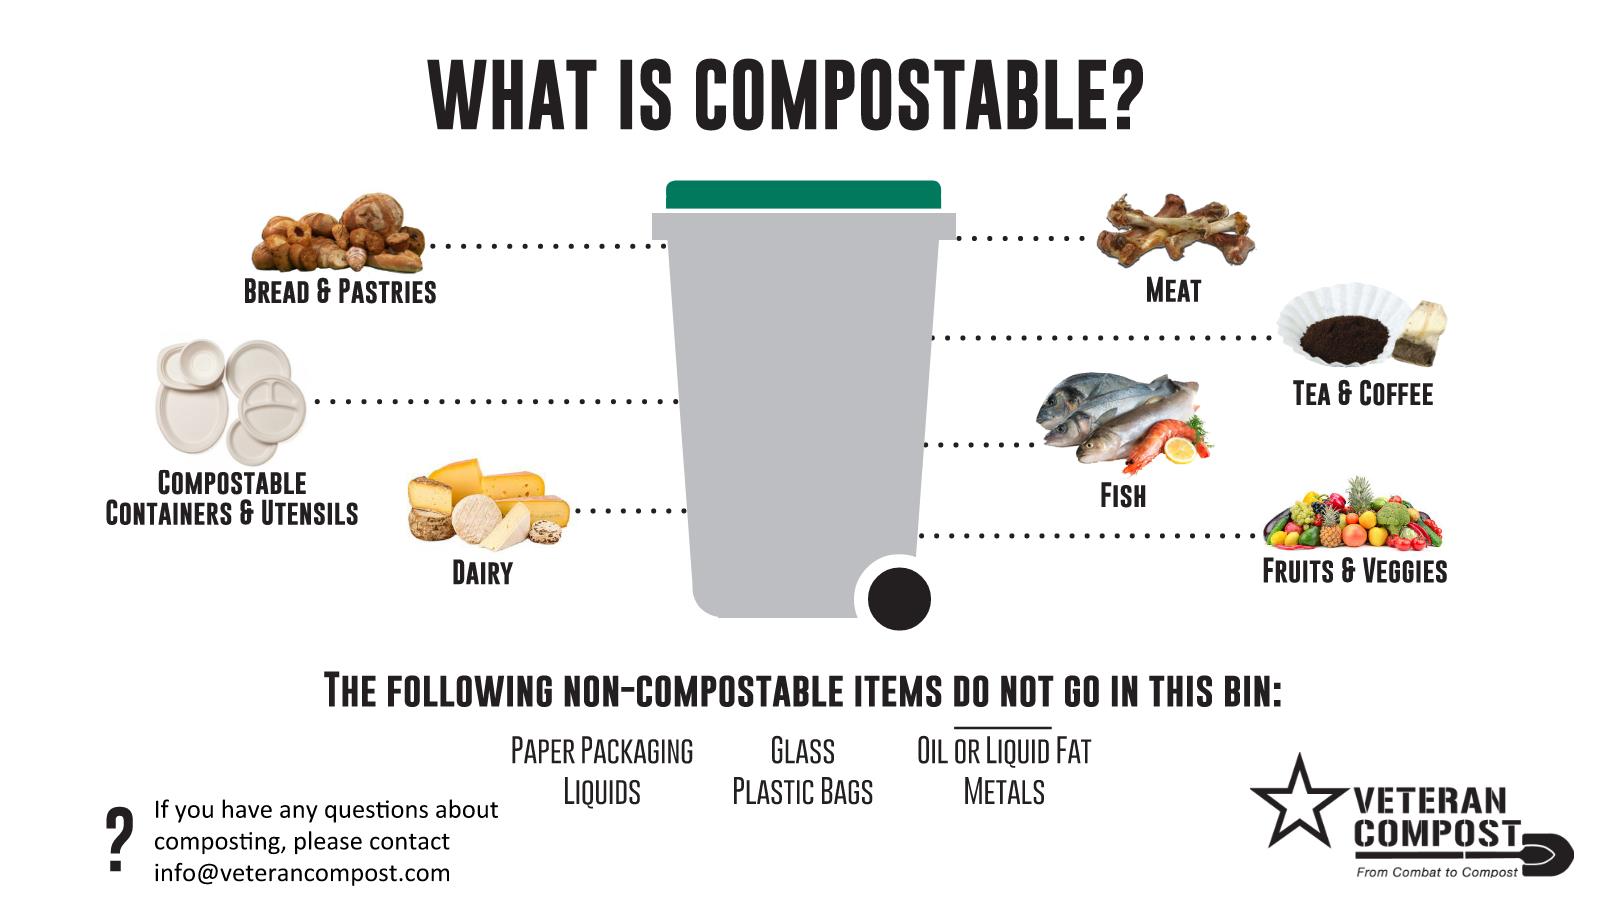 Compost Sign